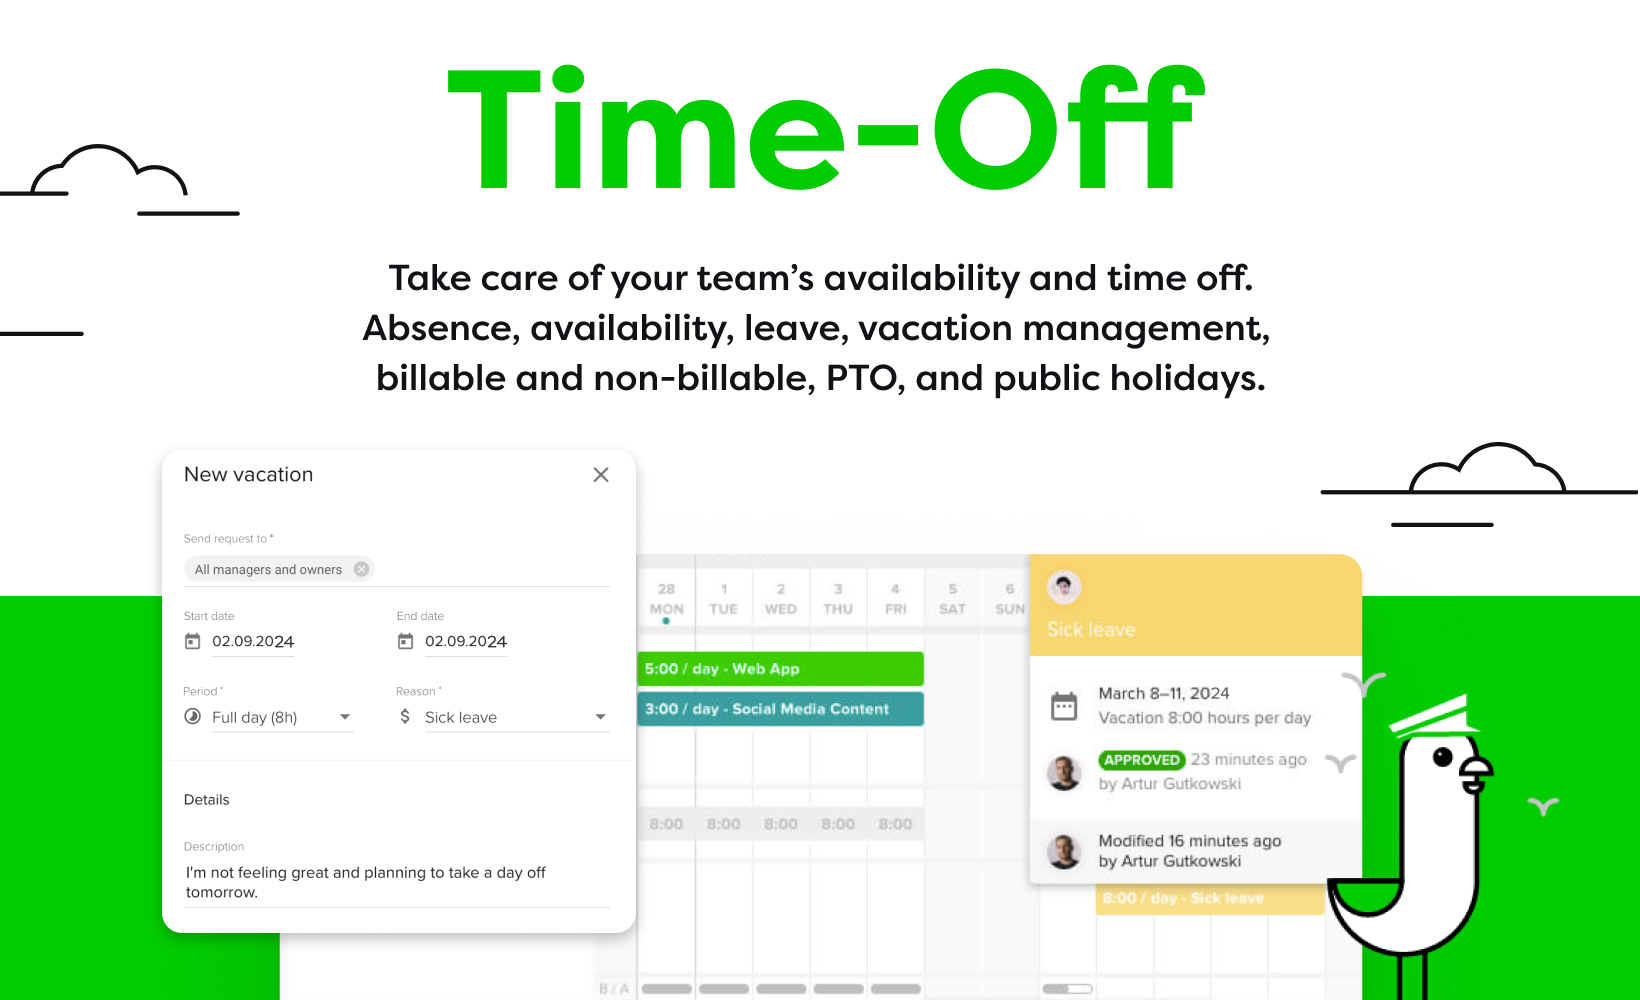 Take care of your team’s availability and time off.